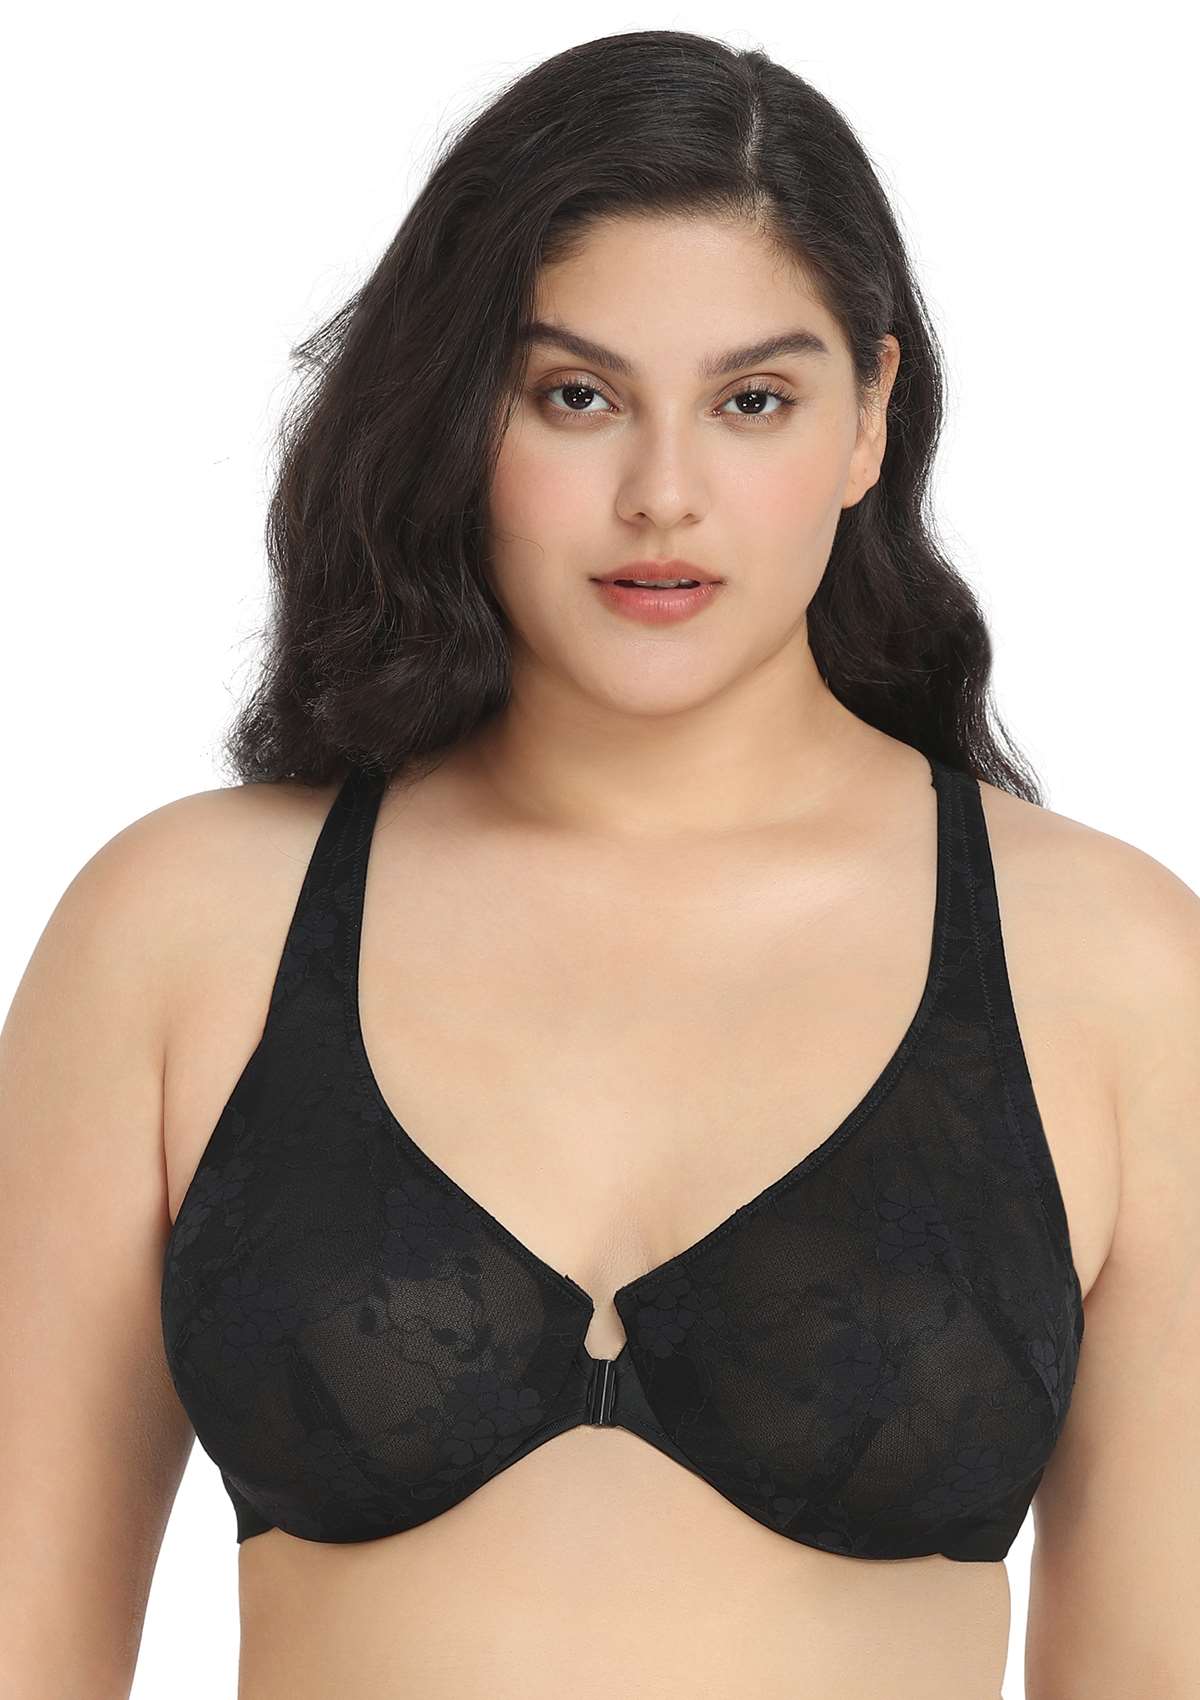 HSIA Spring Romance Front-Close Floral Lace Unlined Full Coverage Bra - Black / 42 / DDD/F